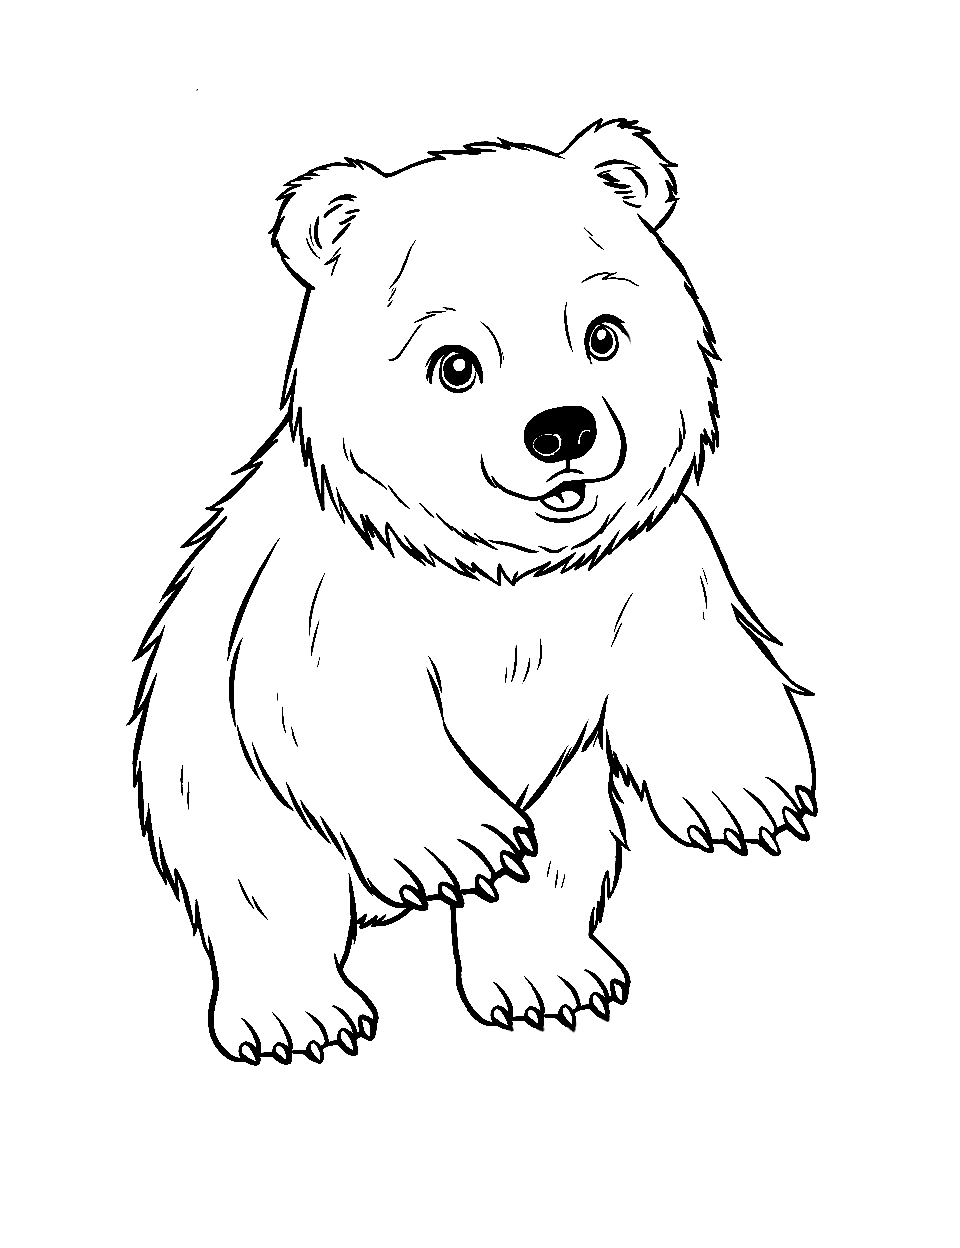 Bear coloring pages free printable sheets